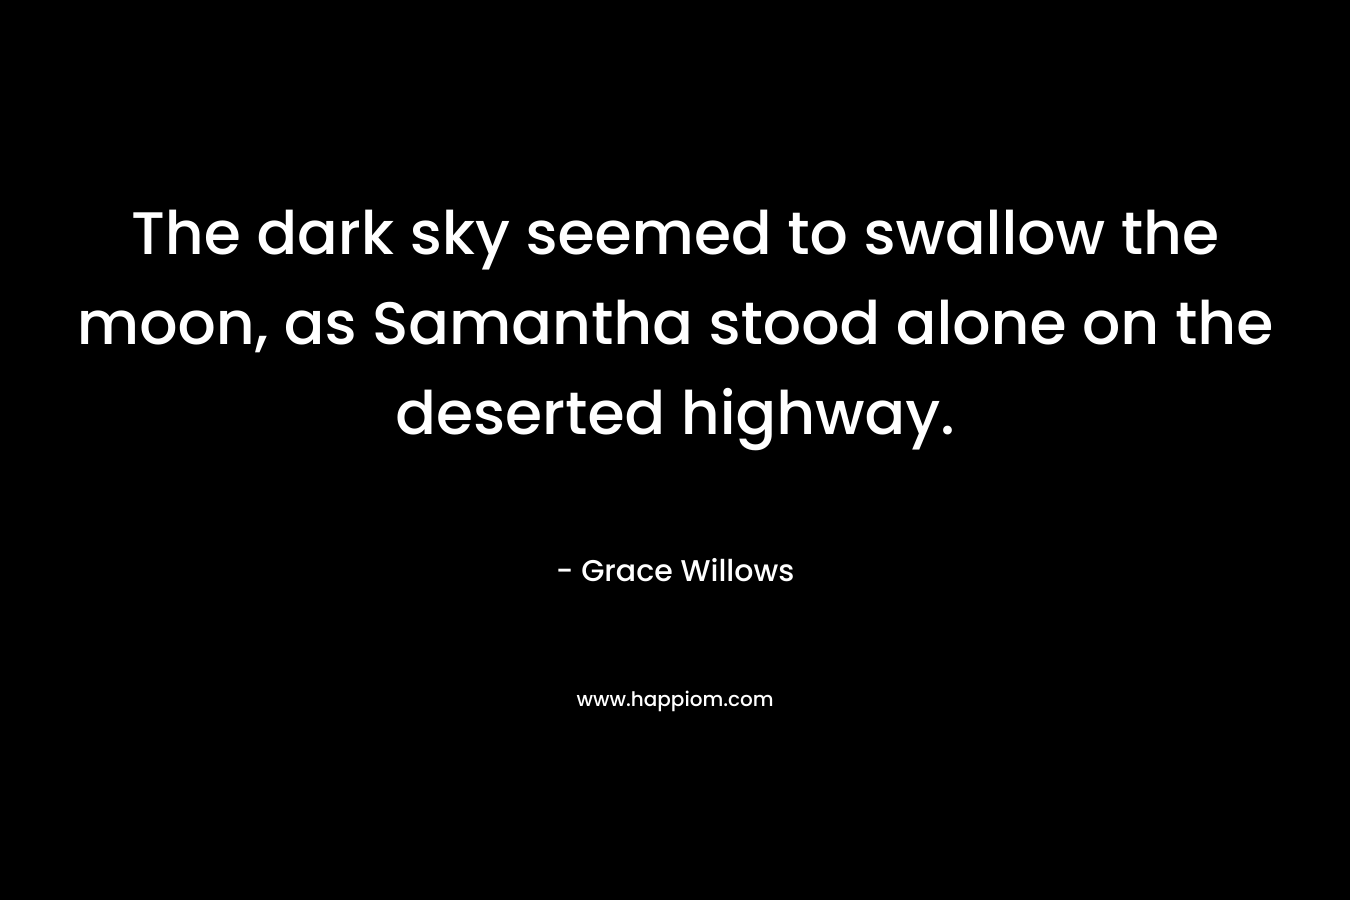 The dark sky seemed to swallow the moon, as Samantha stood alone on the deserted highway. – Grace Willows